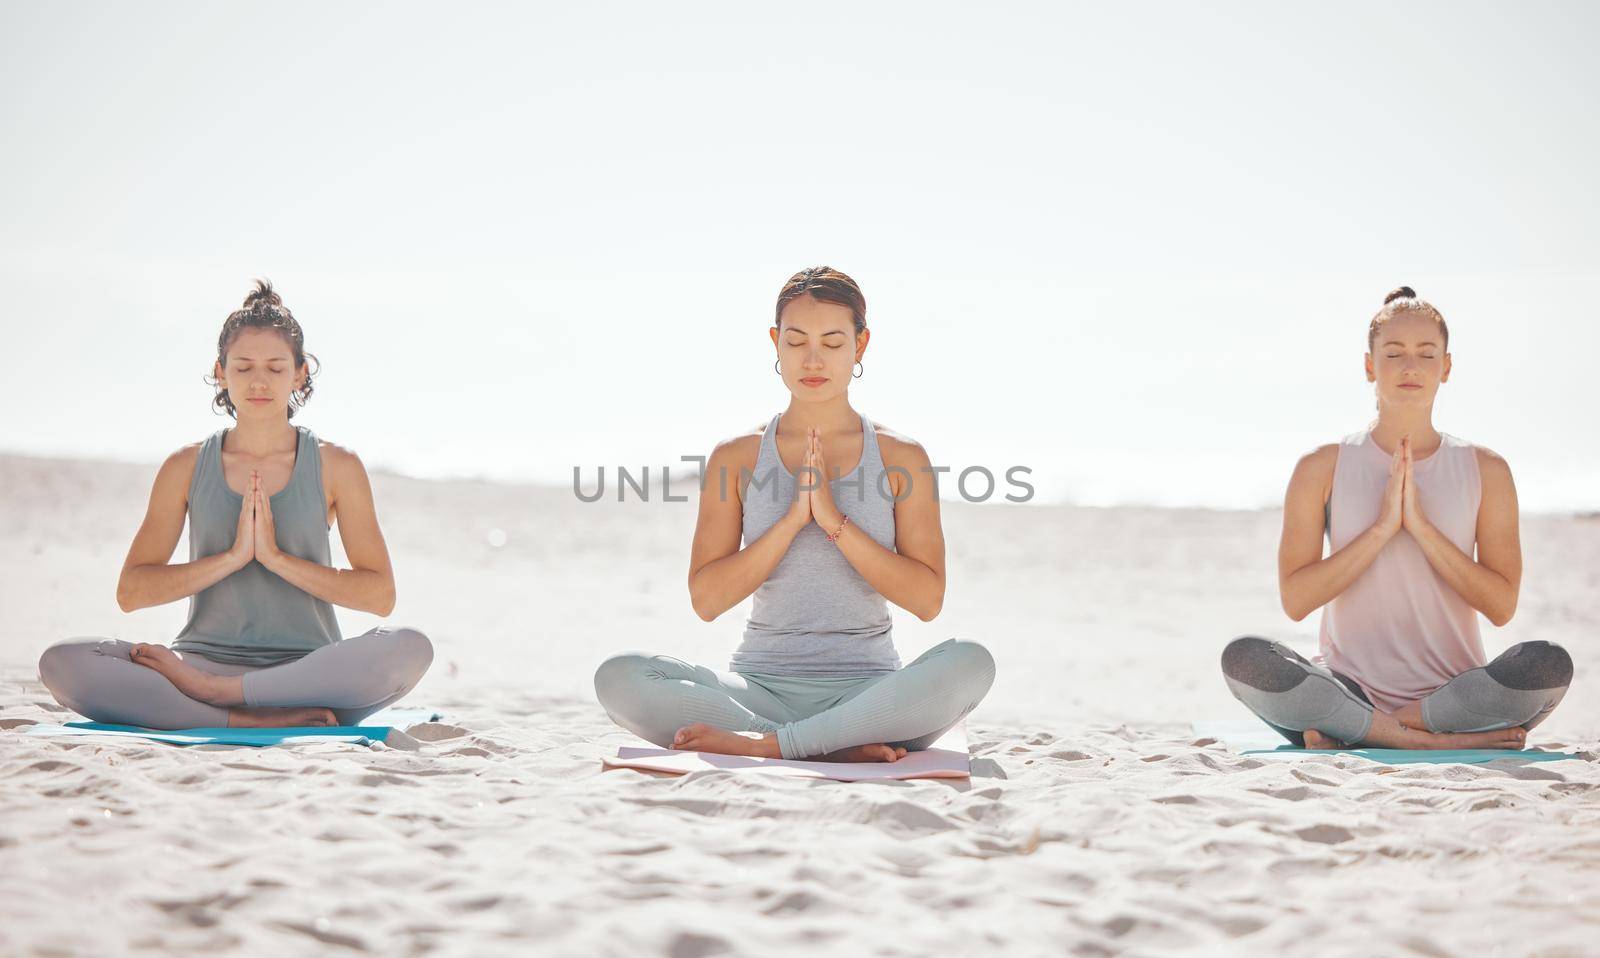 Beach meditation, women or zen friends in mental health wellness exercise, pilates training or mind reiki energy yoga. Relax, namaste prayer hands or people in peace breathing support workout on sand.